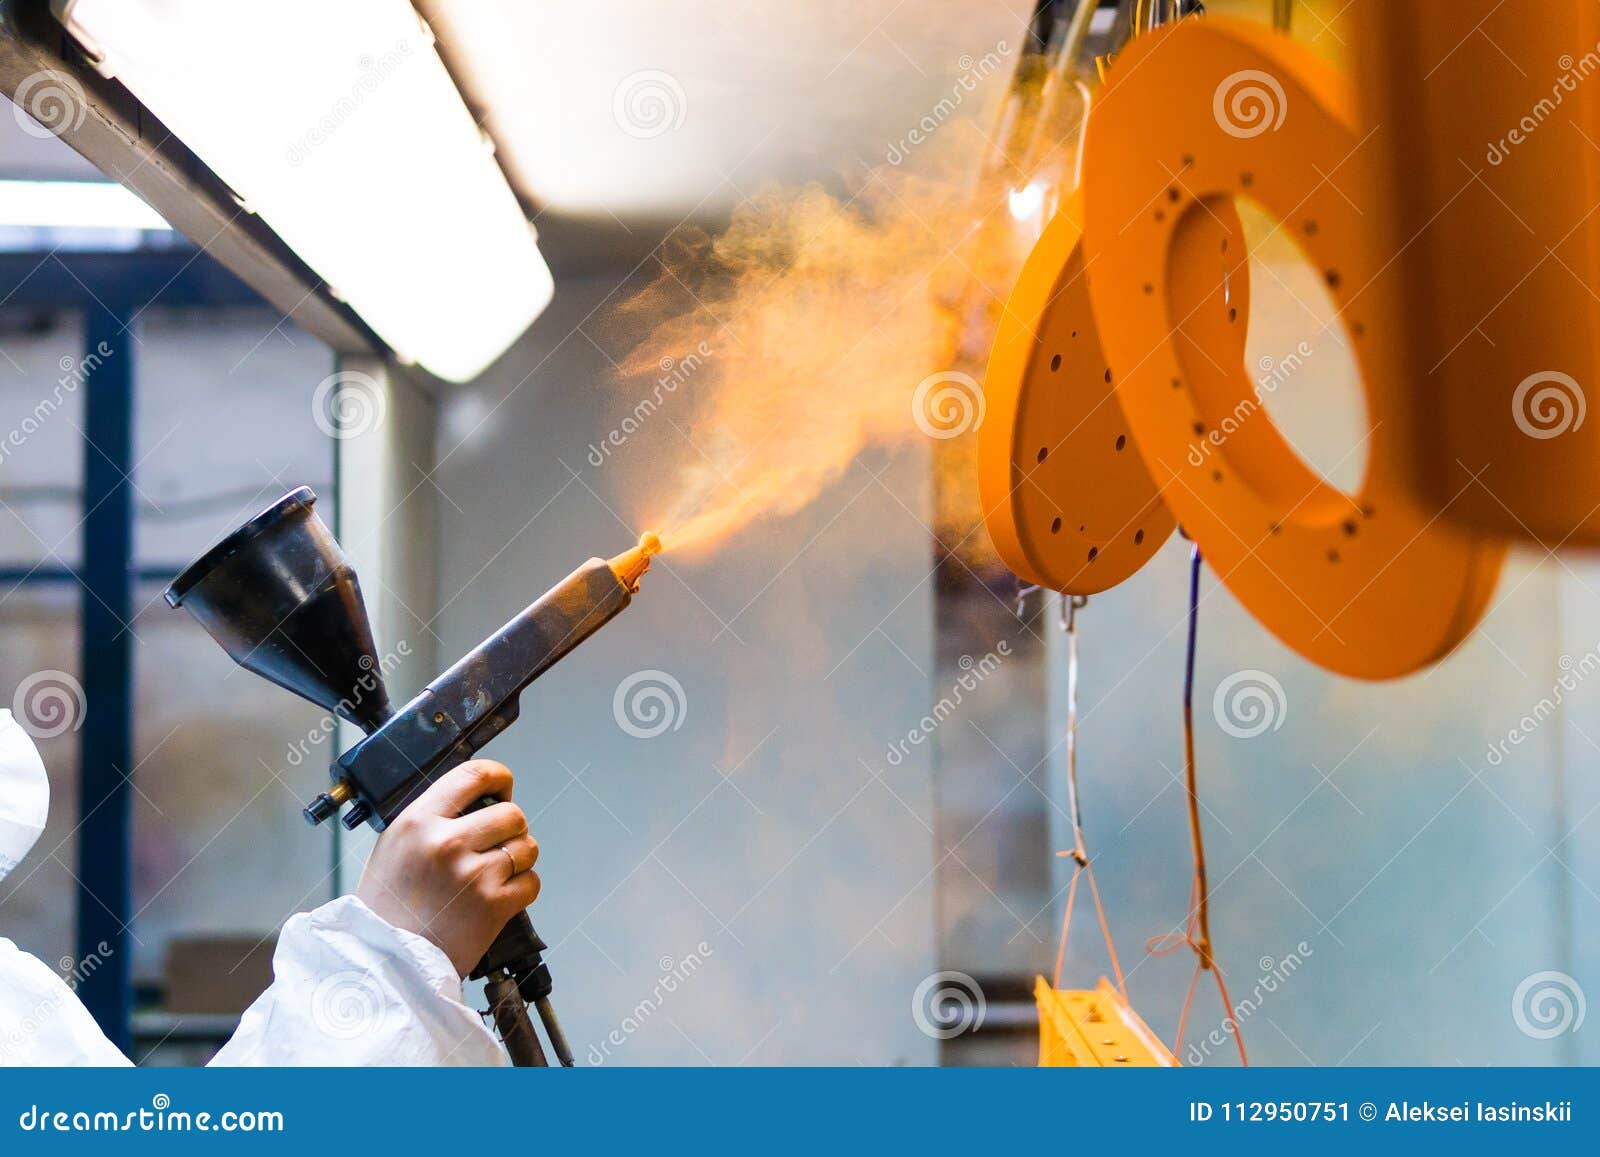 powder coating of metal parts. a woman in a protective suit sprays powder paint from a gun on metal products